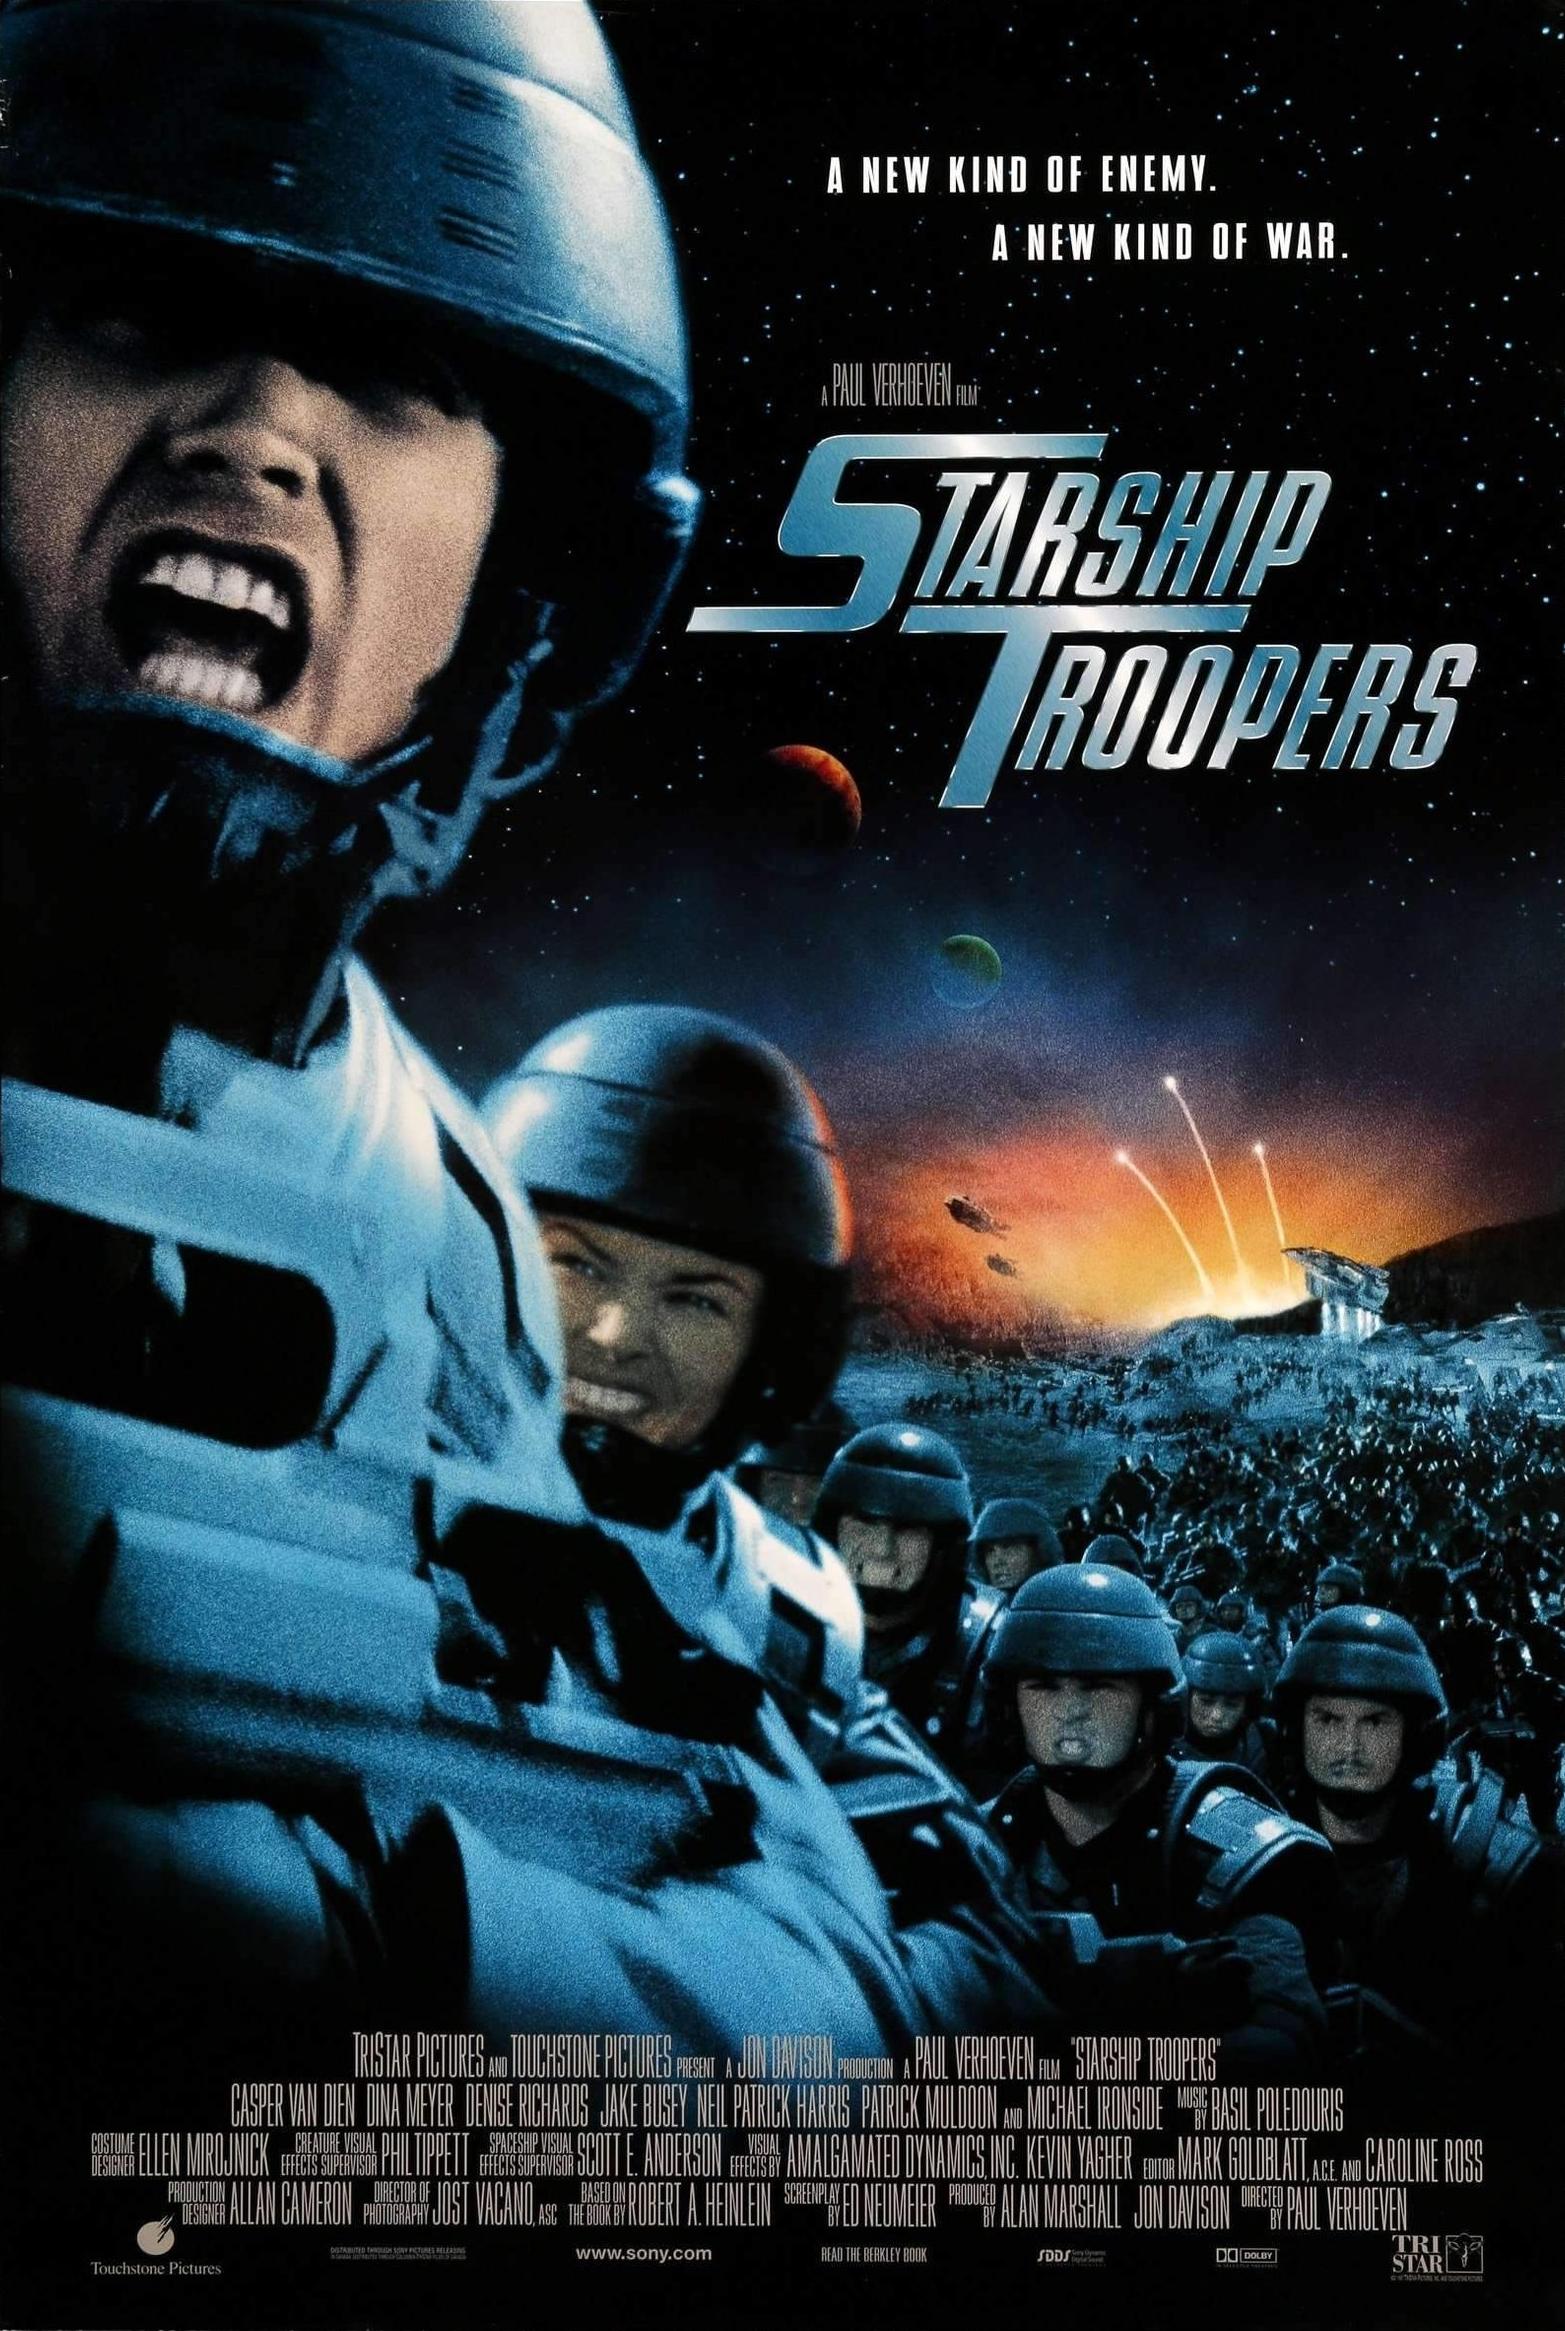 andrew pepin recommends starship troopers movie download pic